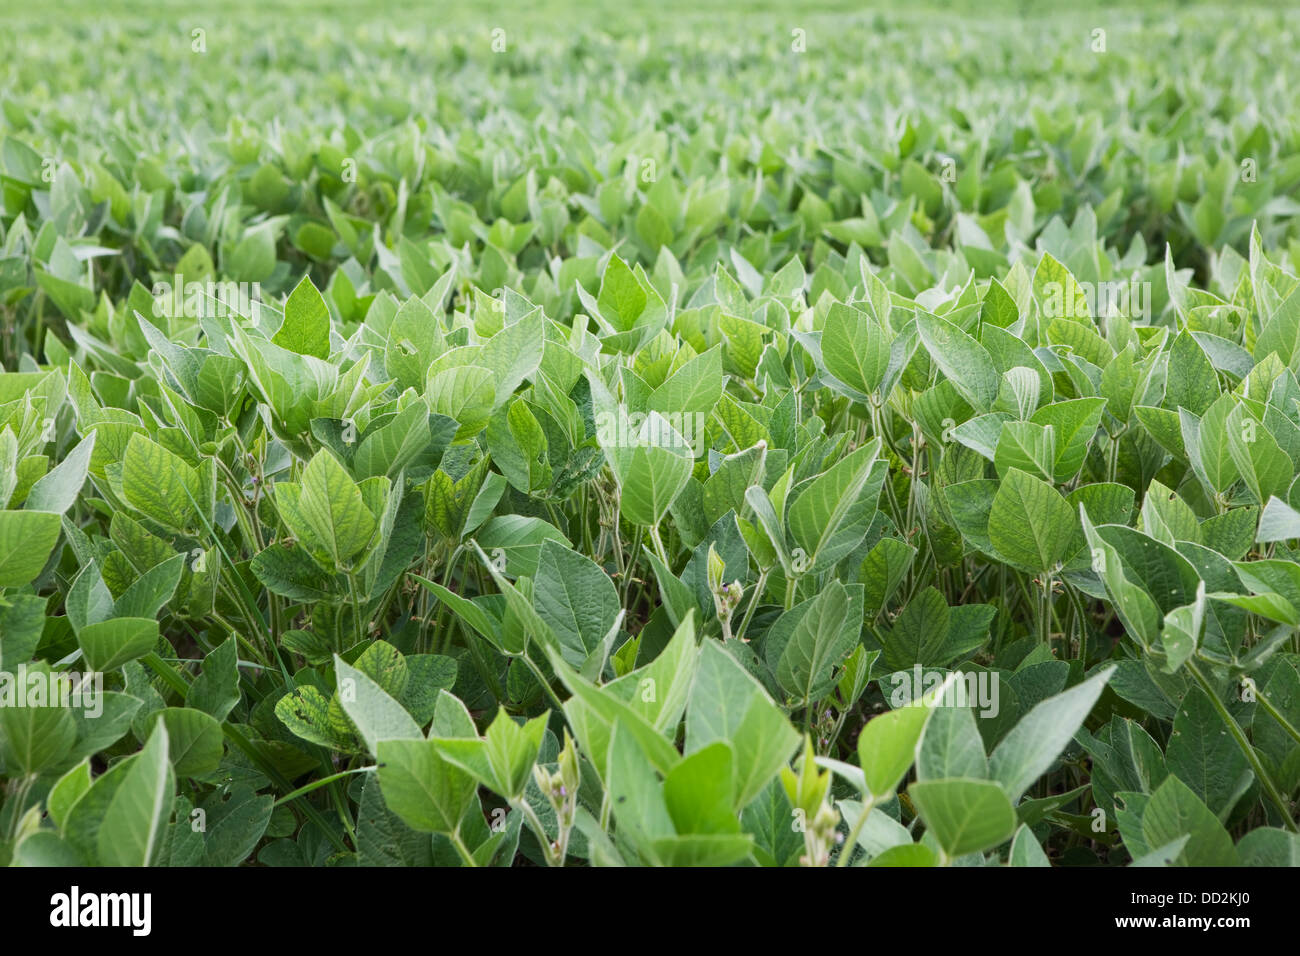 A Field Of Soy Bean Plants; Port Colborne, Ontario, Canada Stock Photo